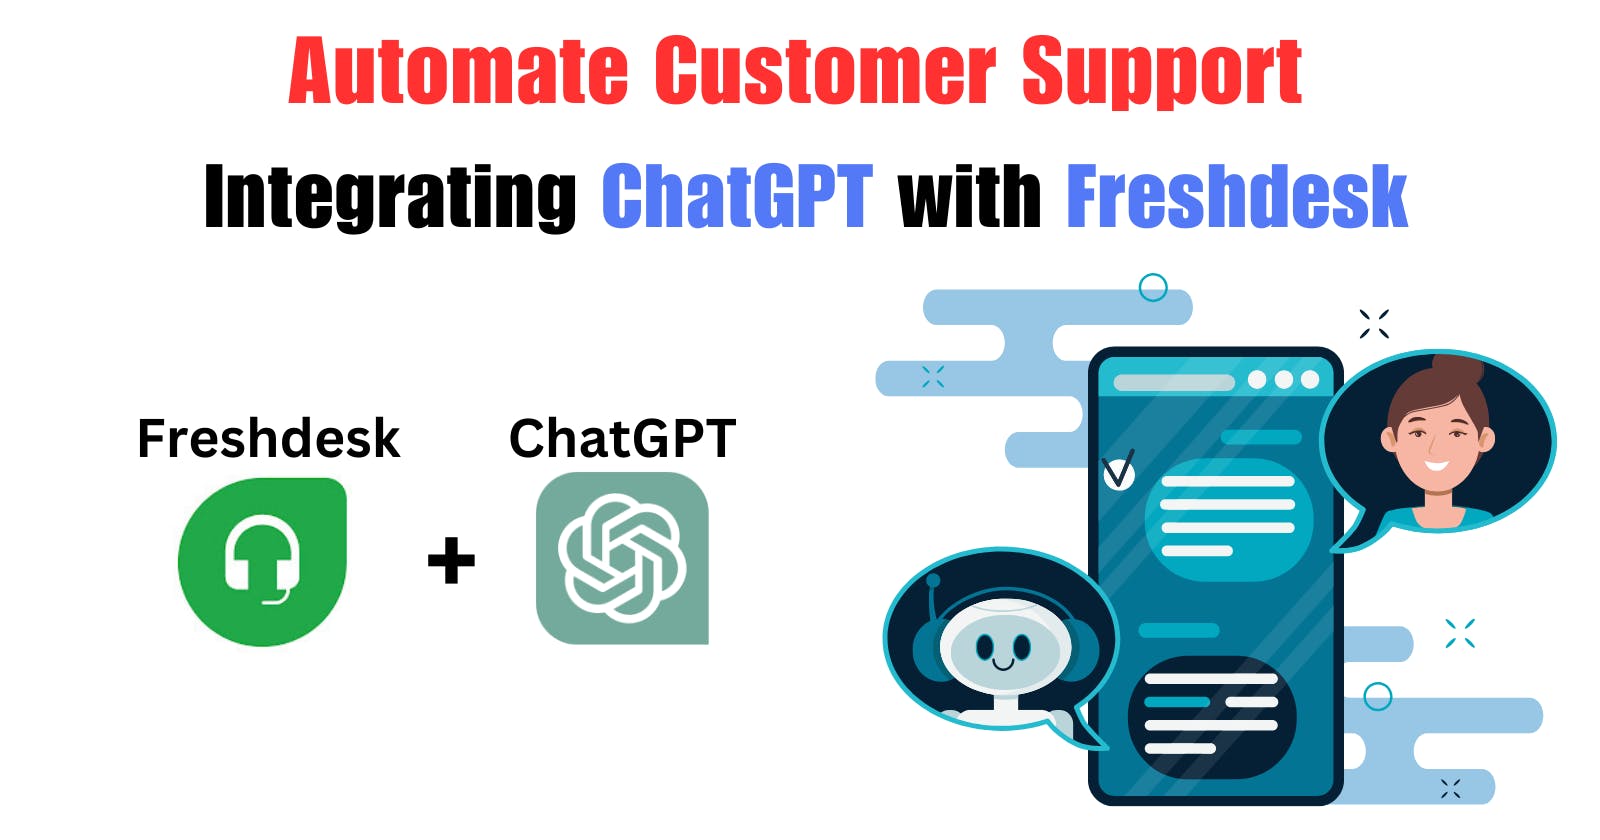 Automate Your Customer Support: Integrating ChatGPT with Freshdesk